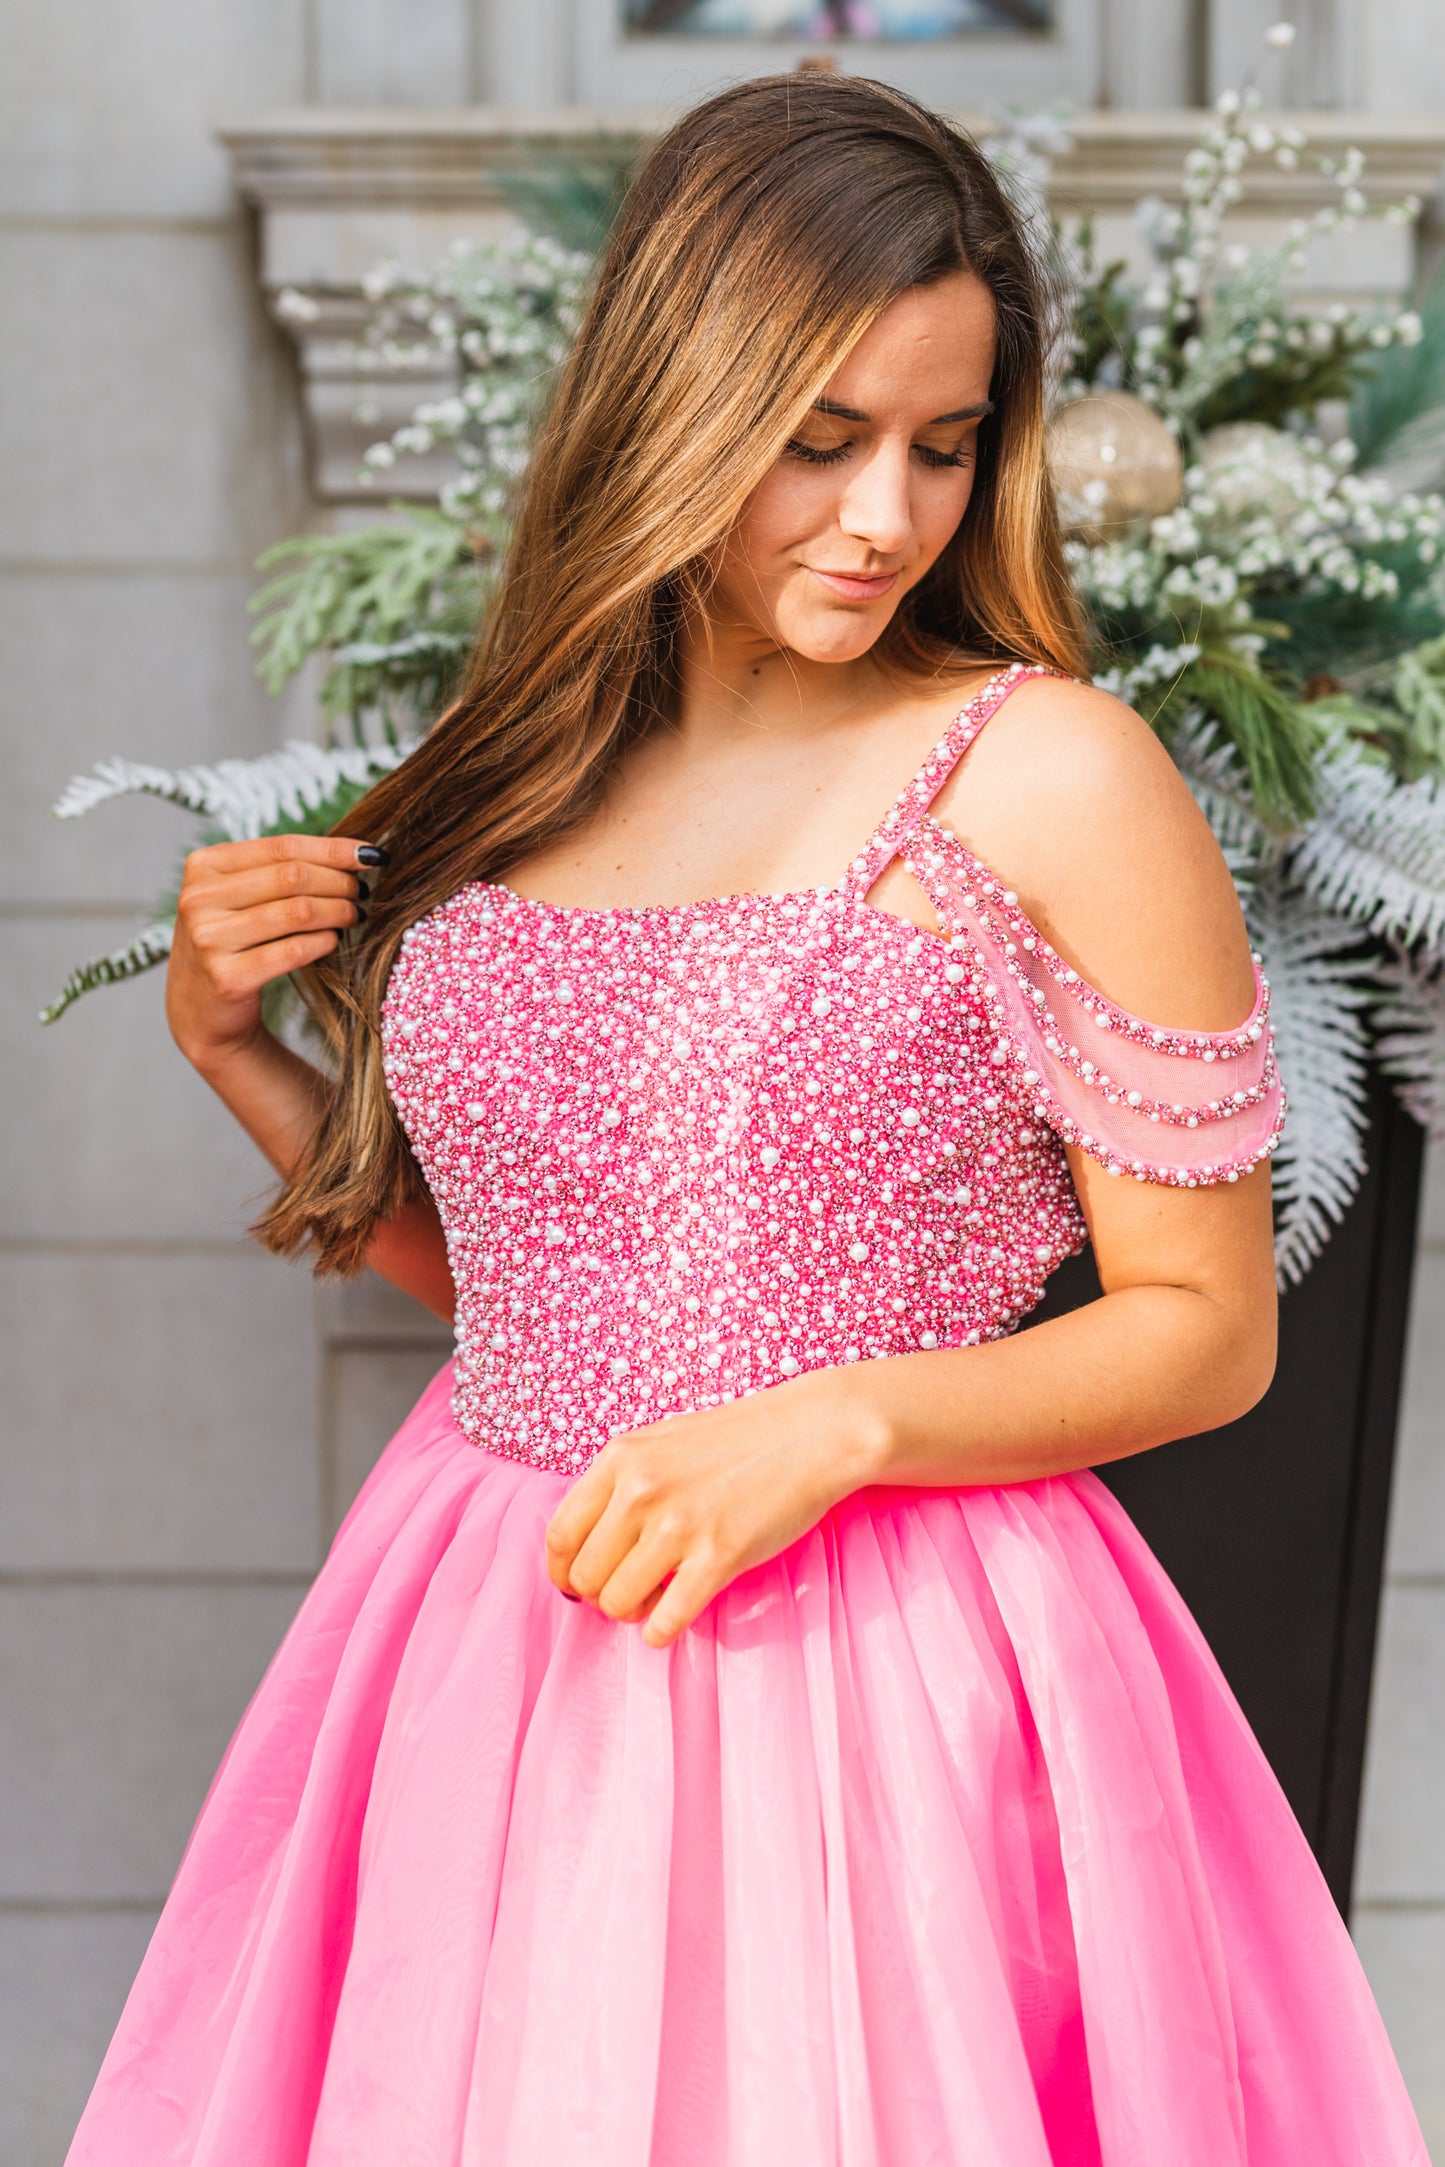 Prom Dress 54976 Candy Pink